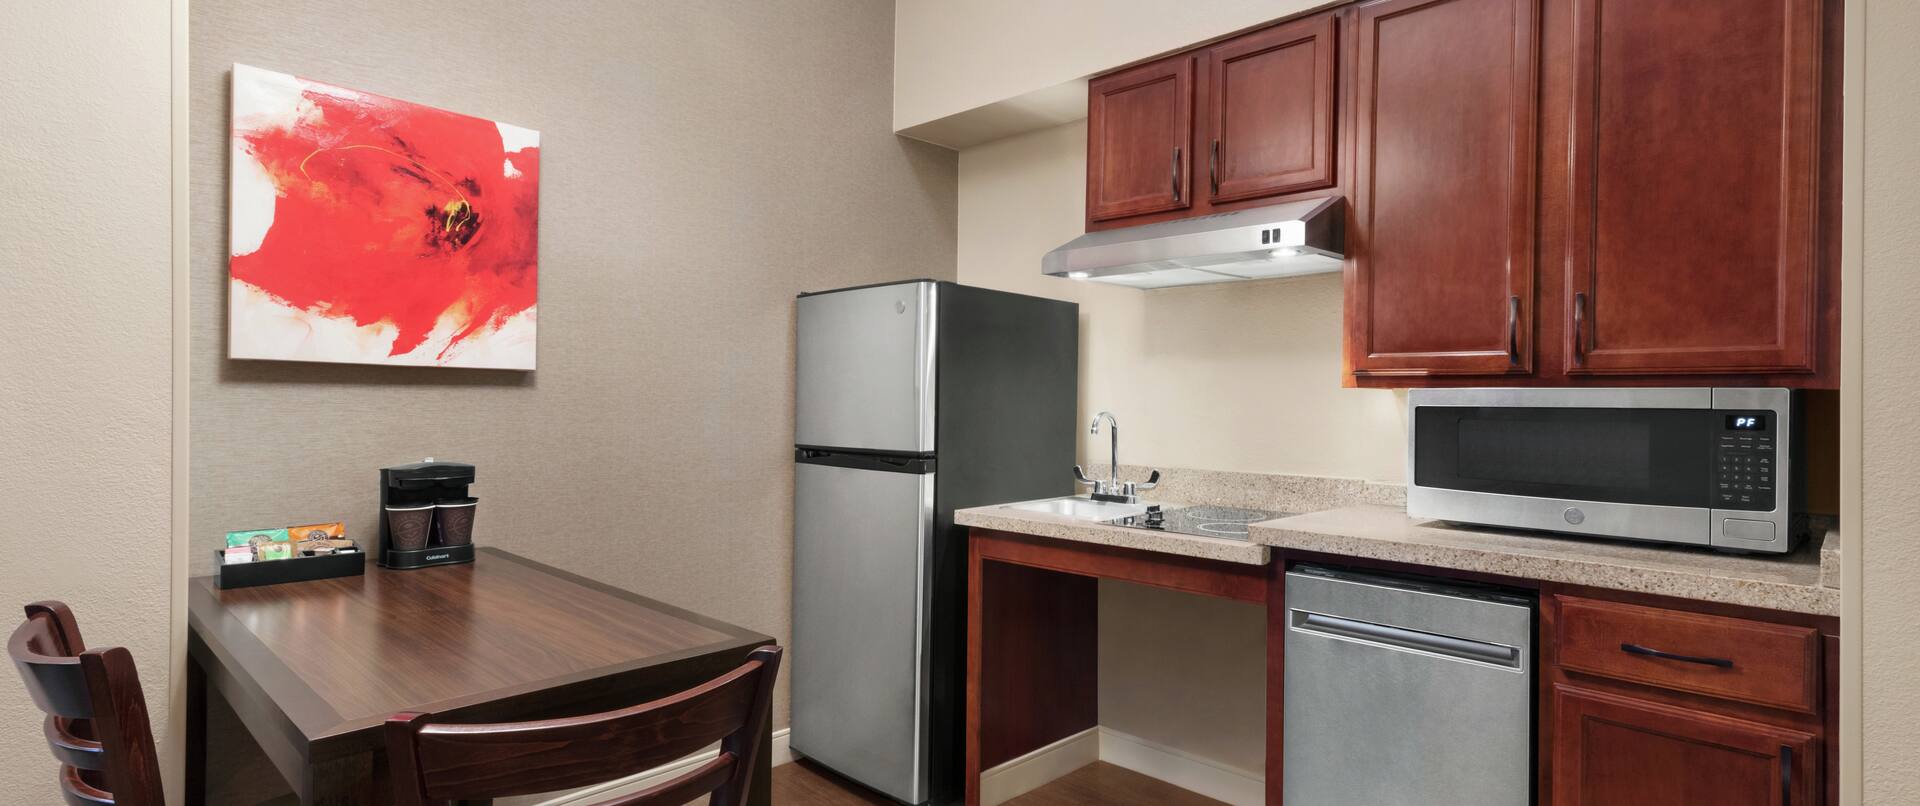 Guest Room Kitchen with Sink, Stove Top, Dishwasher, Microwave and Full Size Refrigerator 